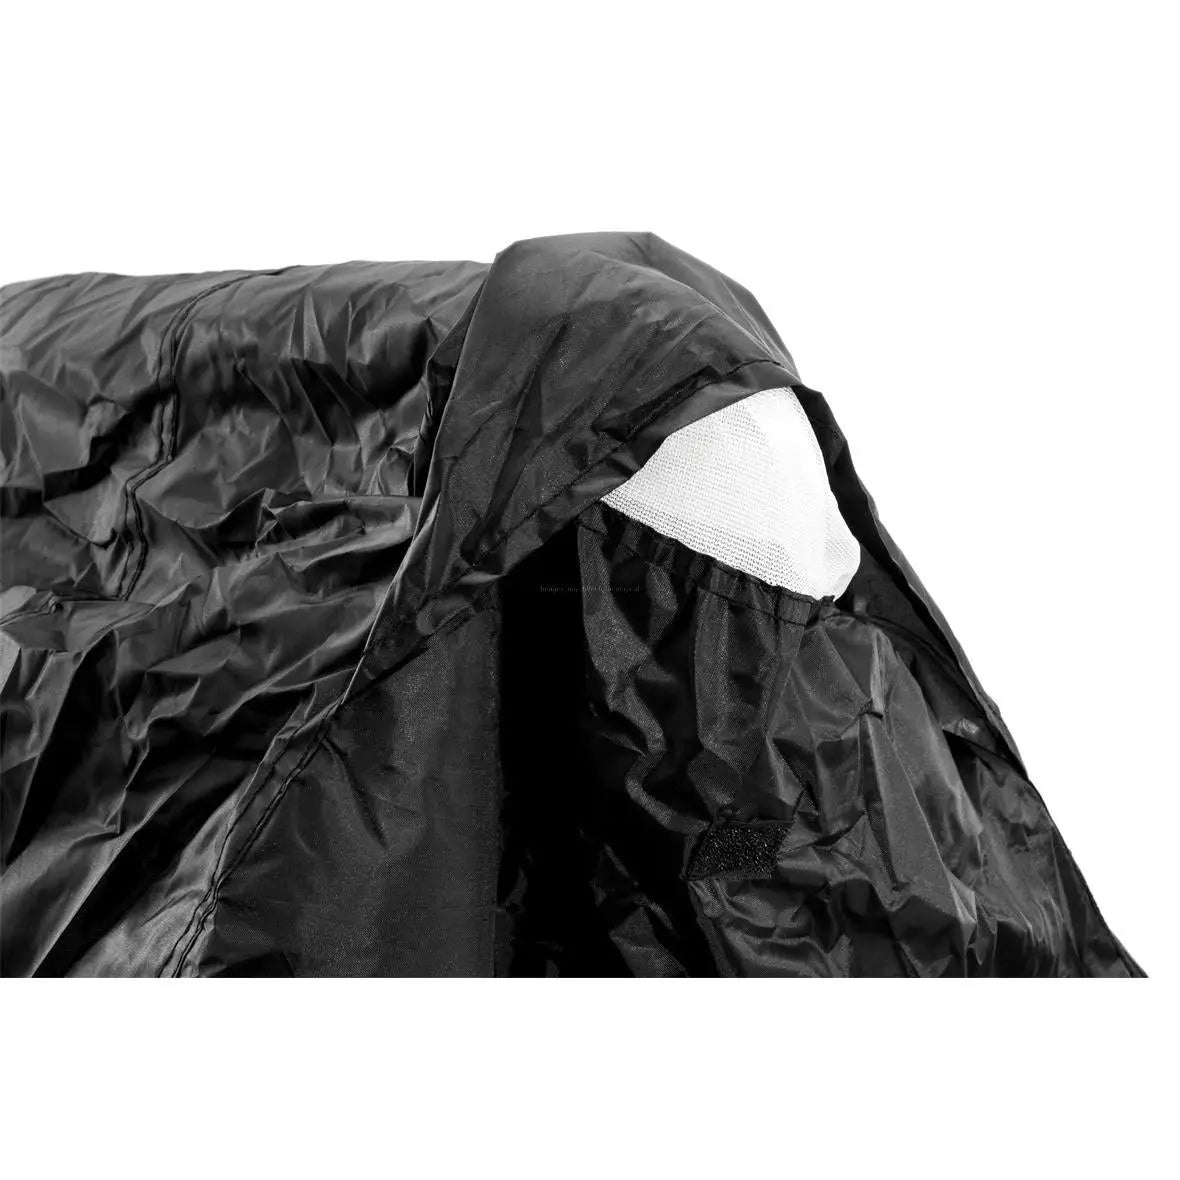 Scooter Cover SIP Outdoor "Scooter" | size M-L 2050x840x1210 mm black/silver SIP 35.80 Falan Parts